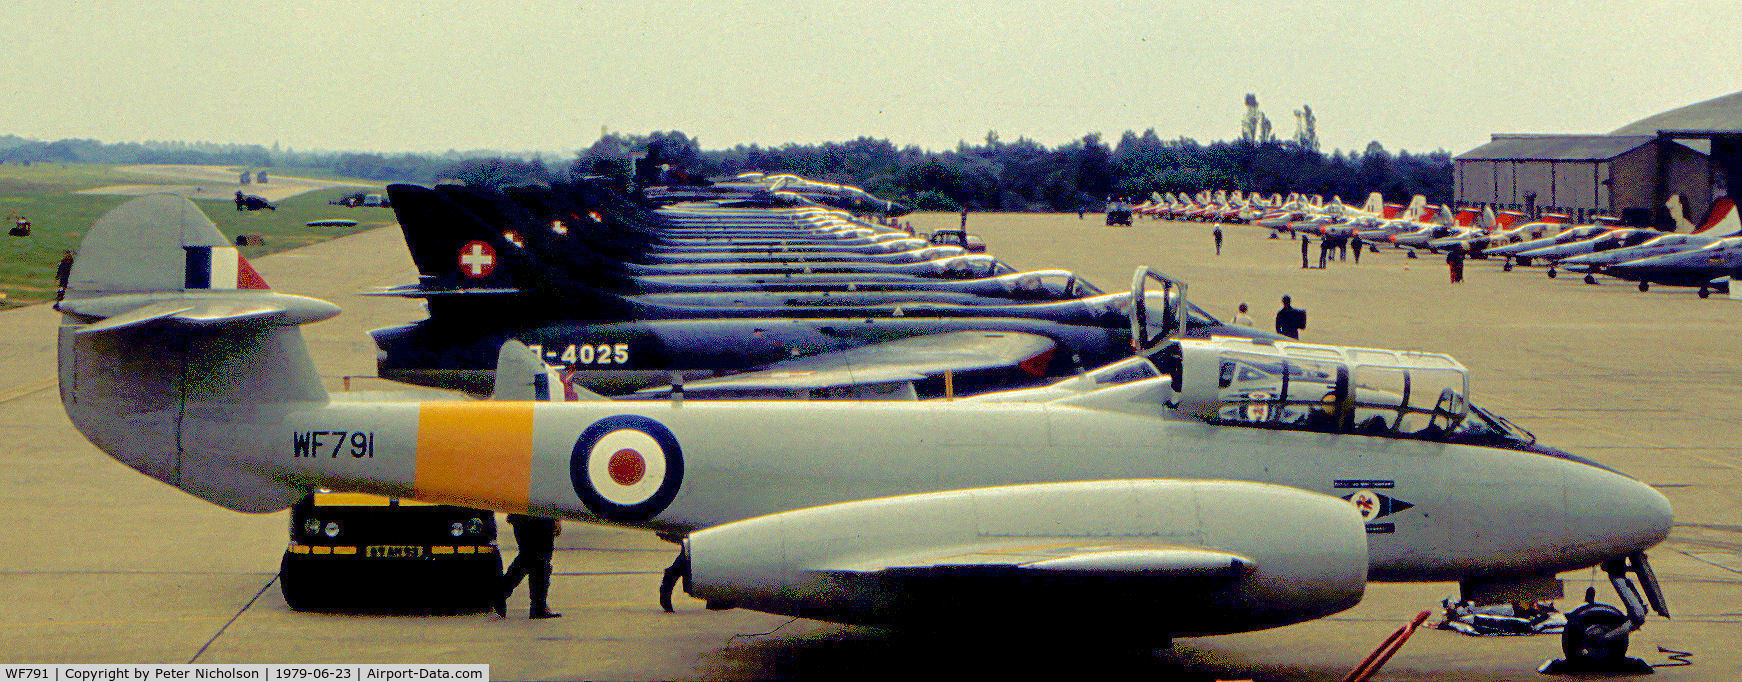 WF791, 1951 Gloster Meteor T.7 C/N 15658, Meteor T.7 of the Central Flying School's Vintage Pair demonstration team on the flight line at the 1979 International Air Tattoo at RAF Greenham Common.